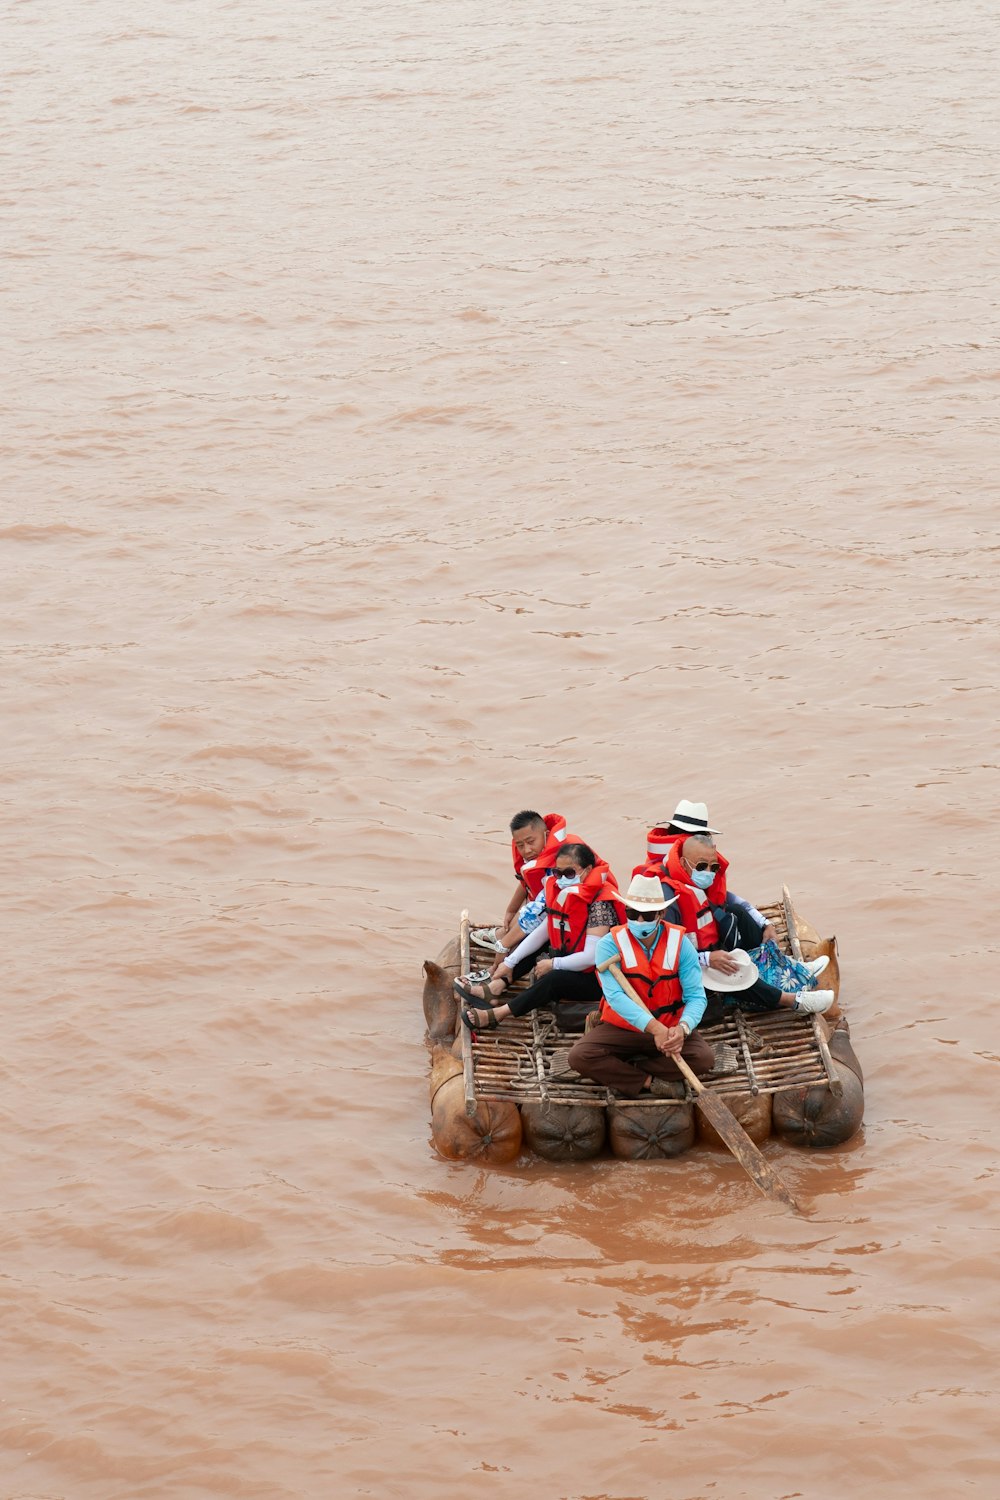 2 men in red and white shirt riding on brown boat on water during daytime